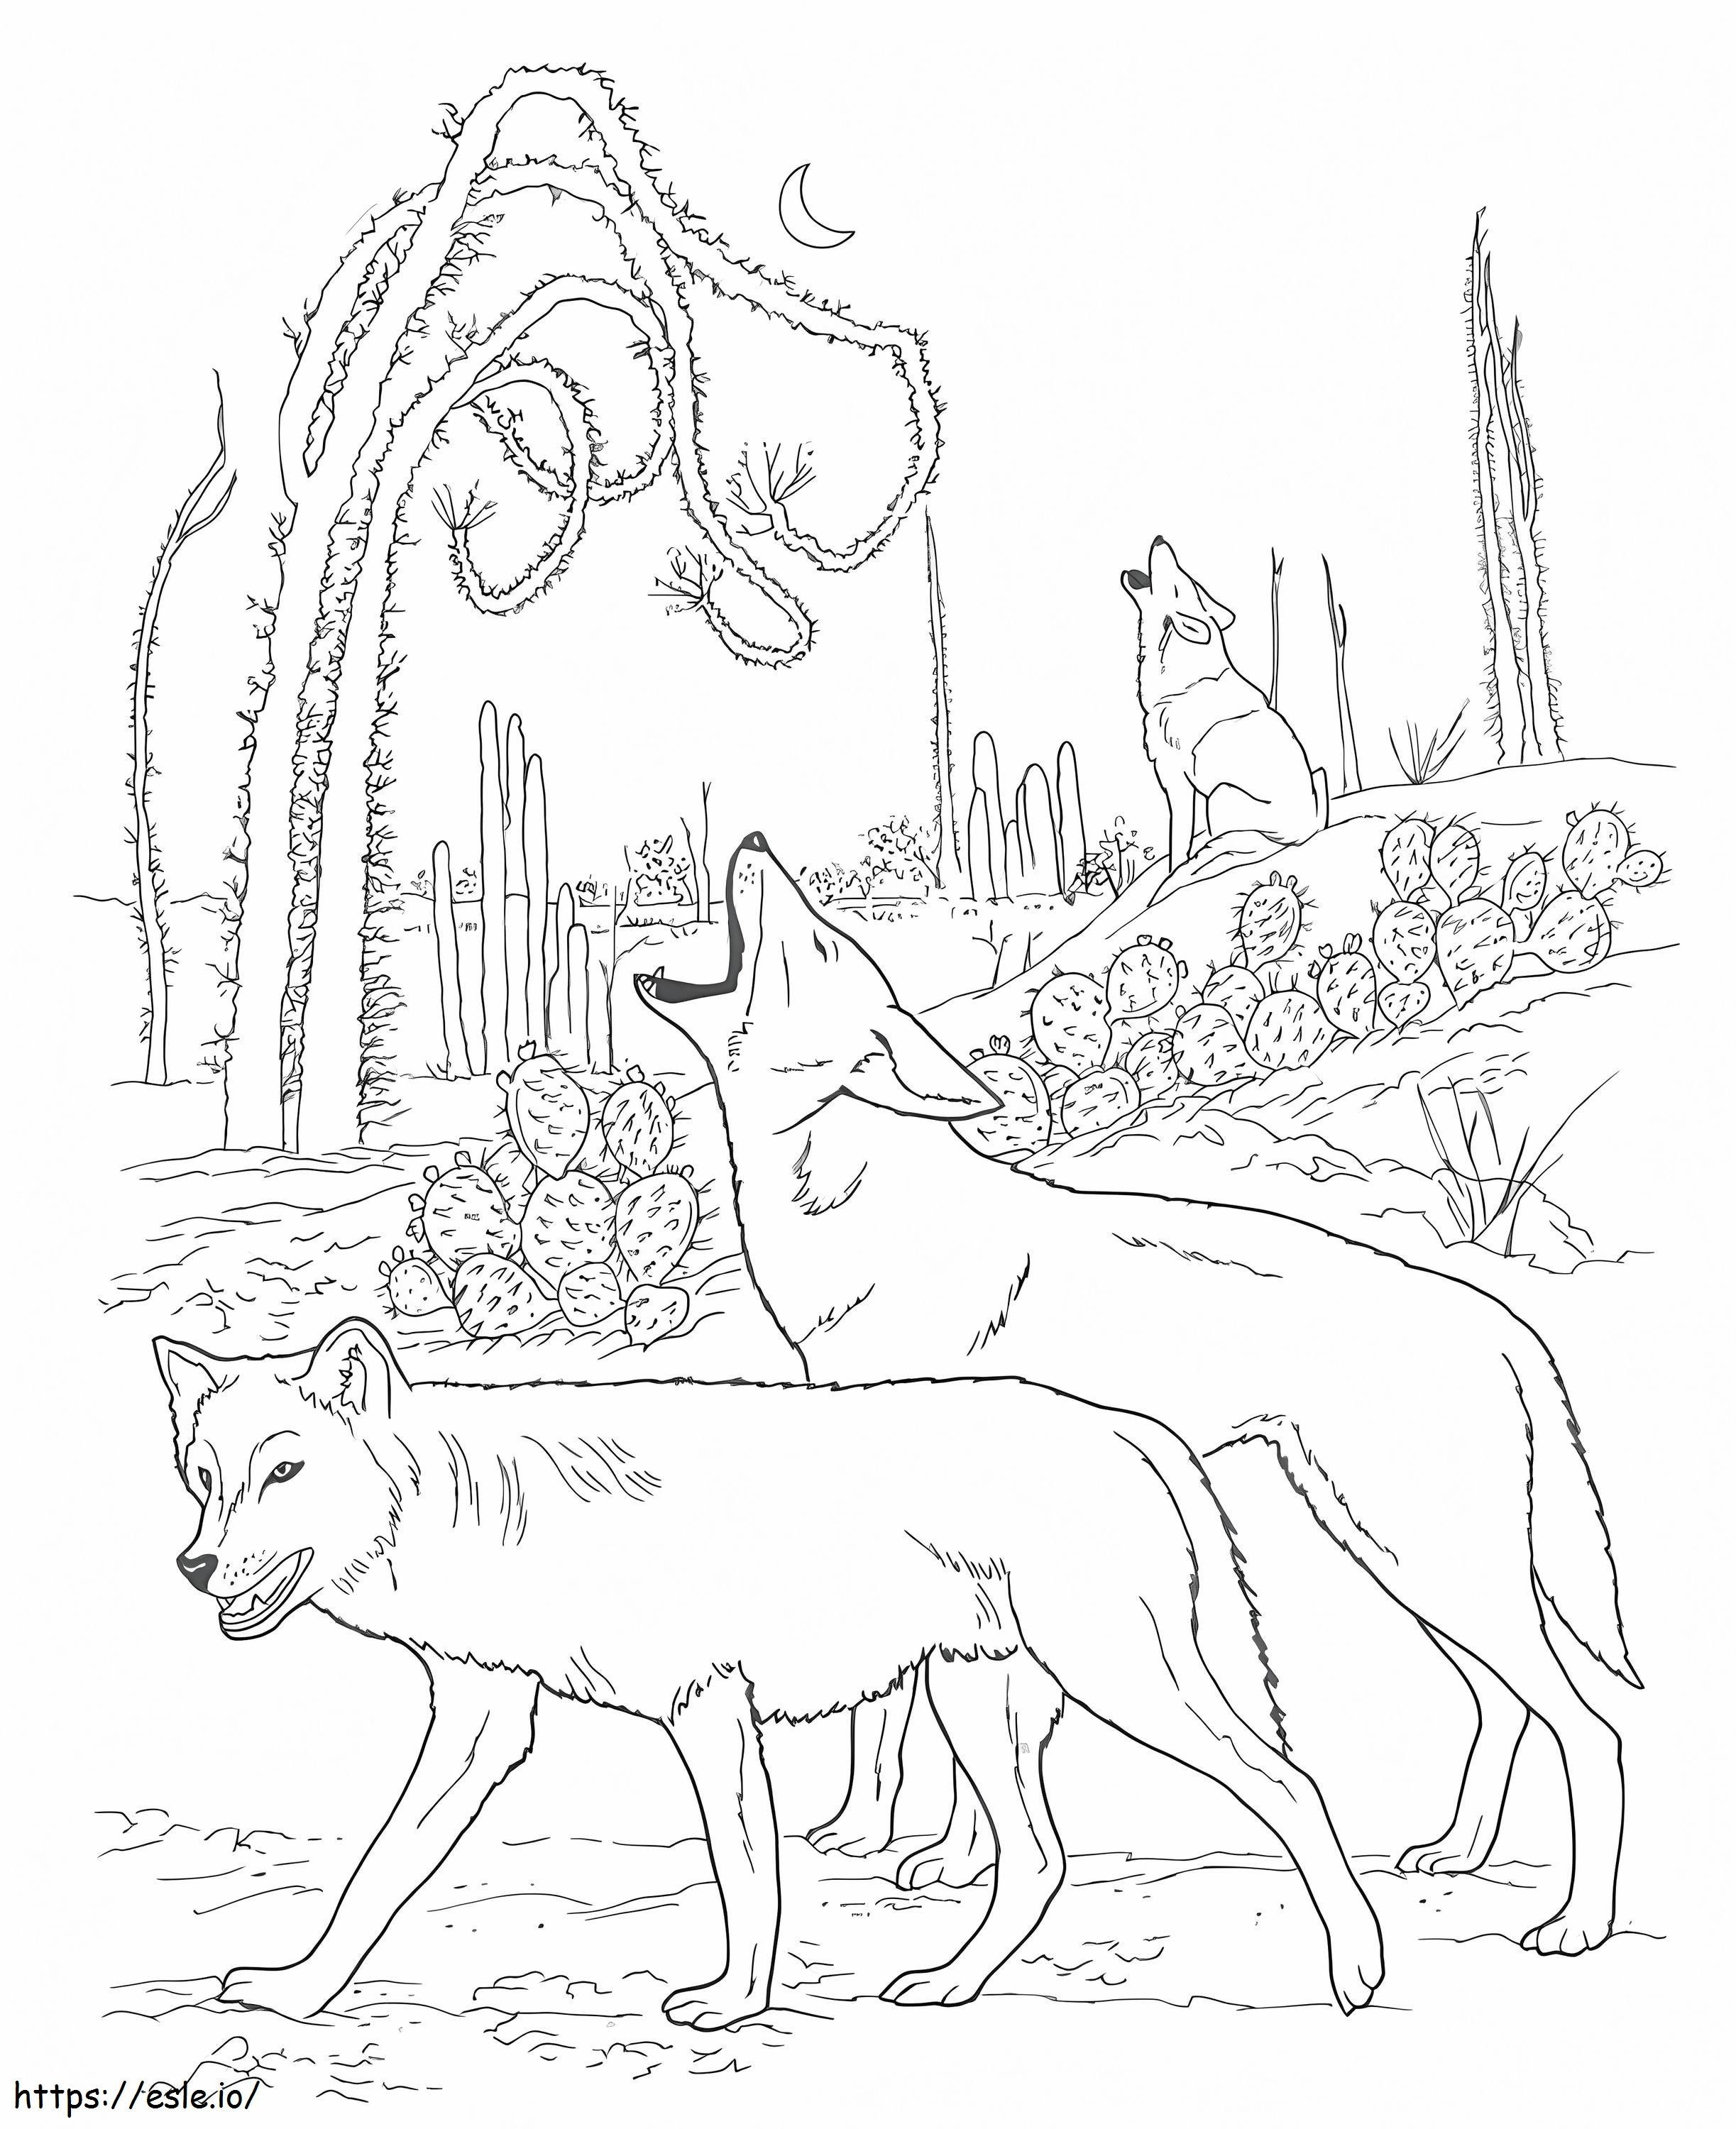 Coyote 2 coloring page